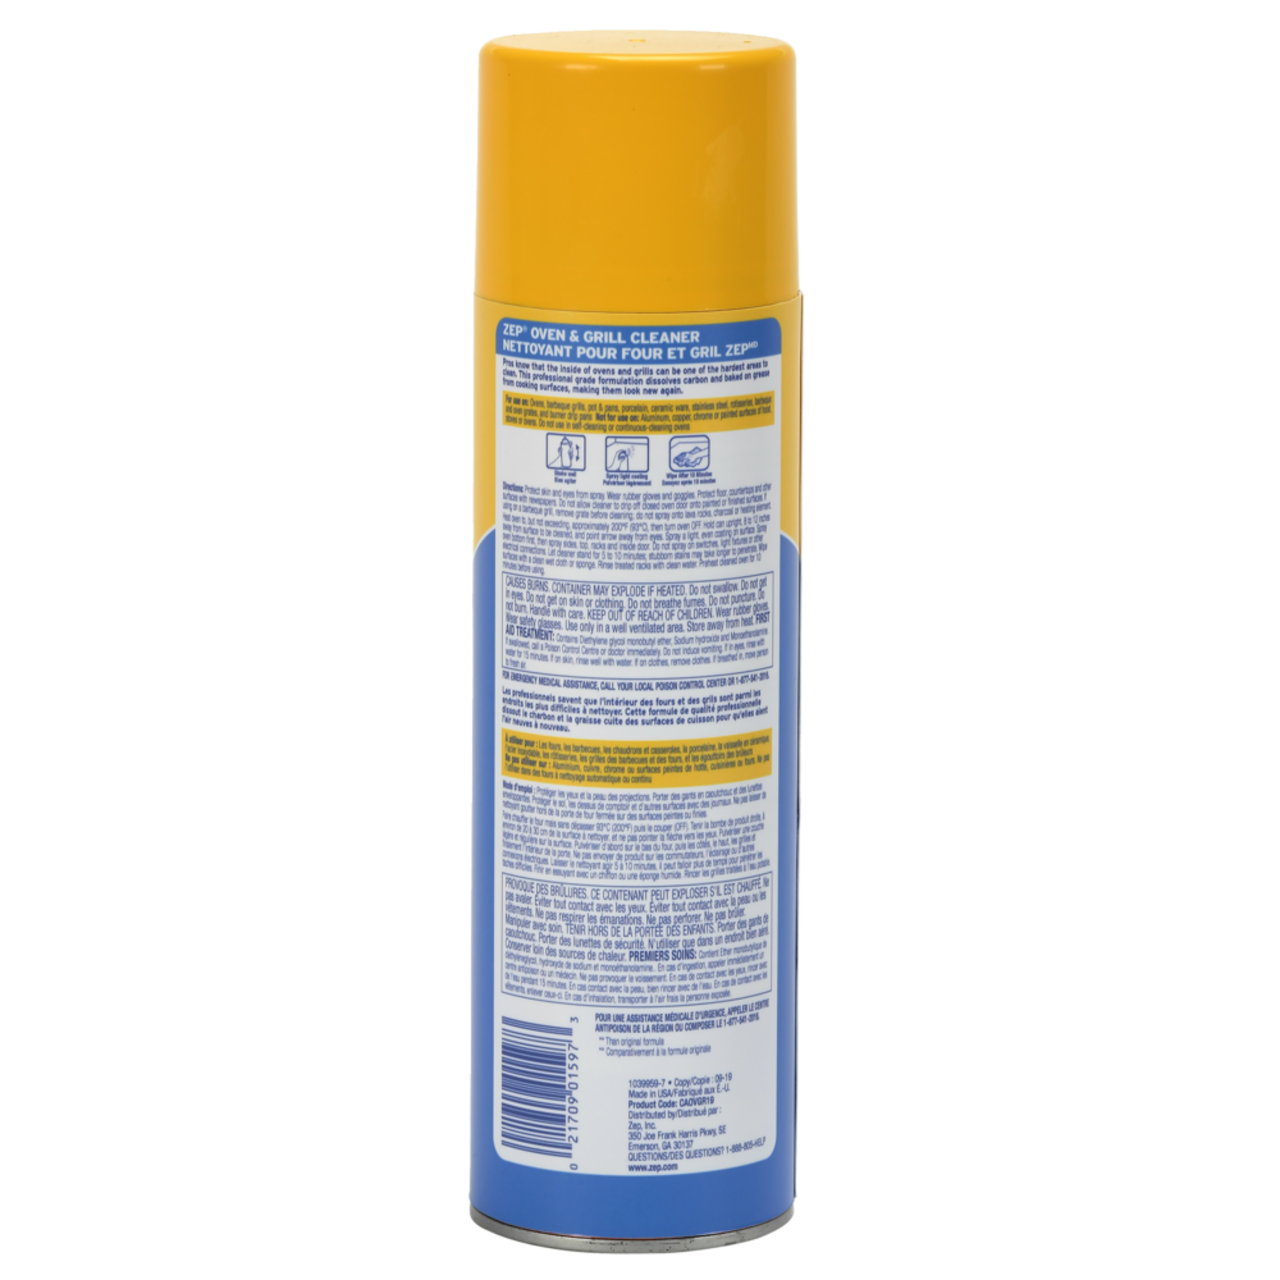 https://media-www.canadiantire.ca/product/living/cleaning/household-cleaning-solutions/0532841/zep-commercial-oven-grill-cleaner-19oz-aerosol-7cf87aa7-284a-40c8-80d8-038f7b2a76e4.png?imdensity=1&imwidth=1244&impolicy=mZoom